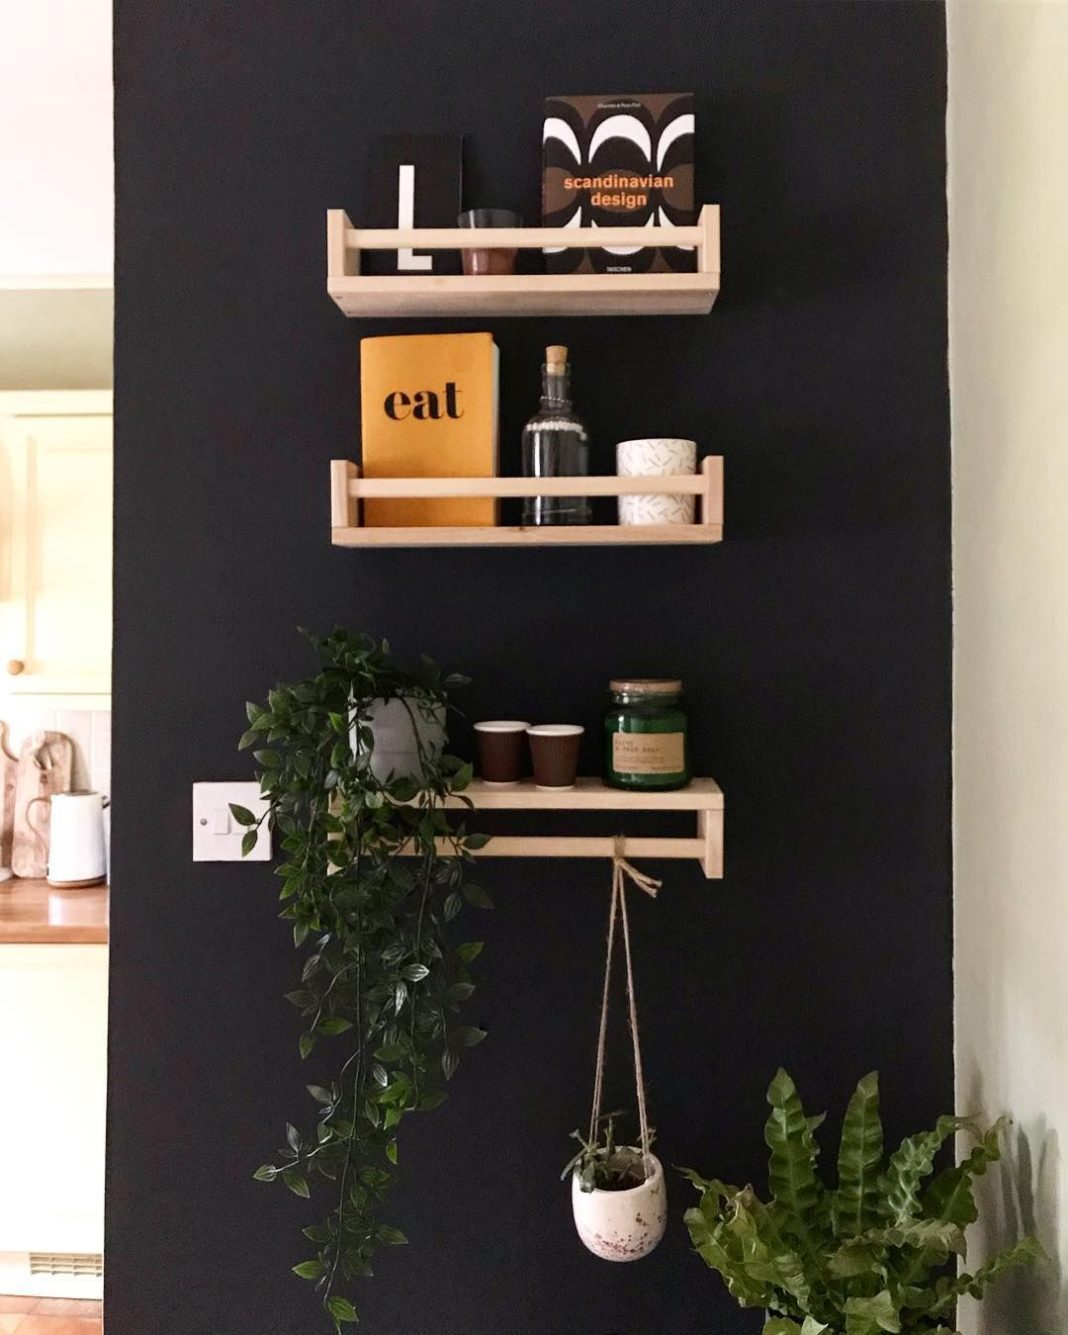 7 Brilliant Organizing Hacks Made Possible Thanks to IKEA Finds